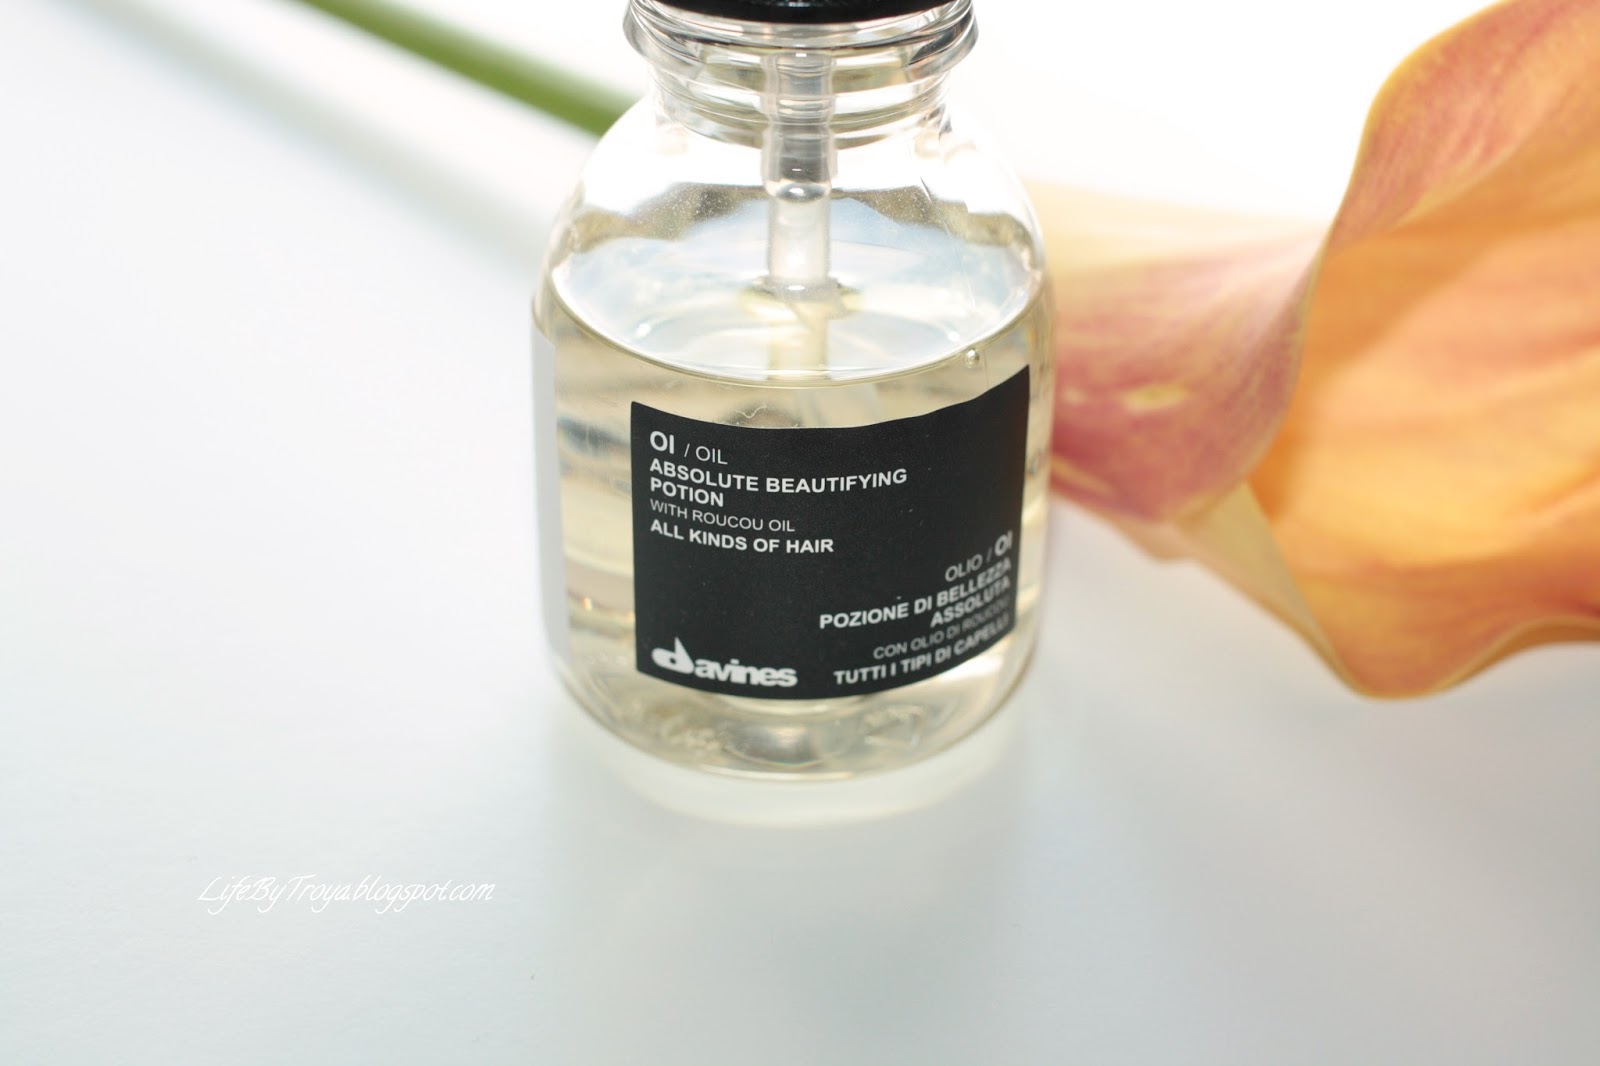 Davines absolute beautifying. Davines oi Oil. Масло Давинес 135. Davines ol absolute Beautifying Potion. Пробник Davines oi Oil 4ml.